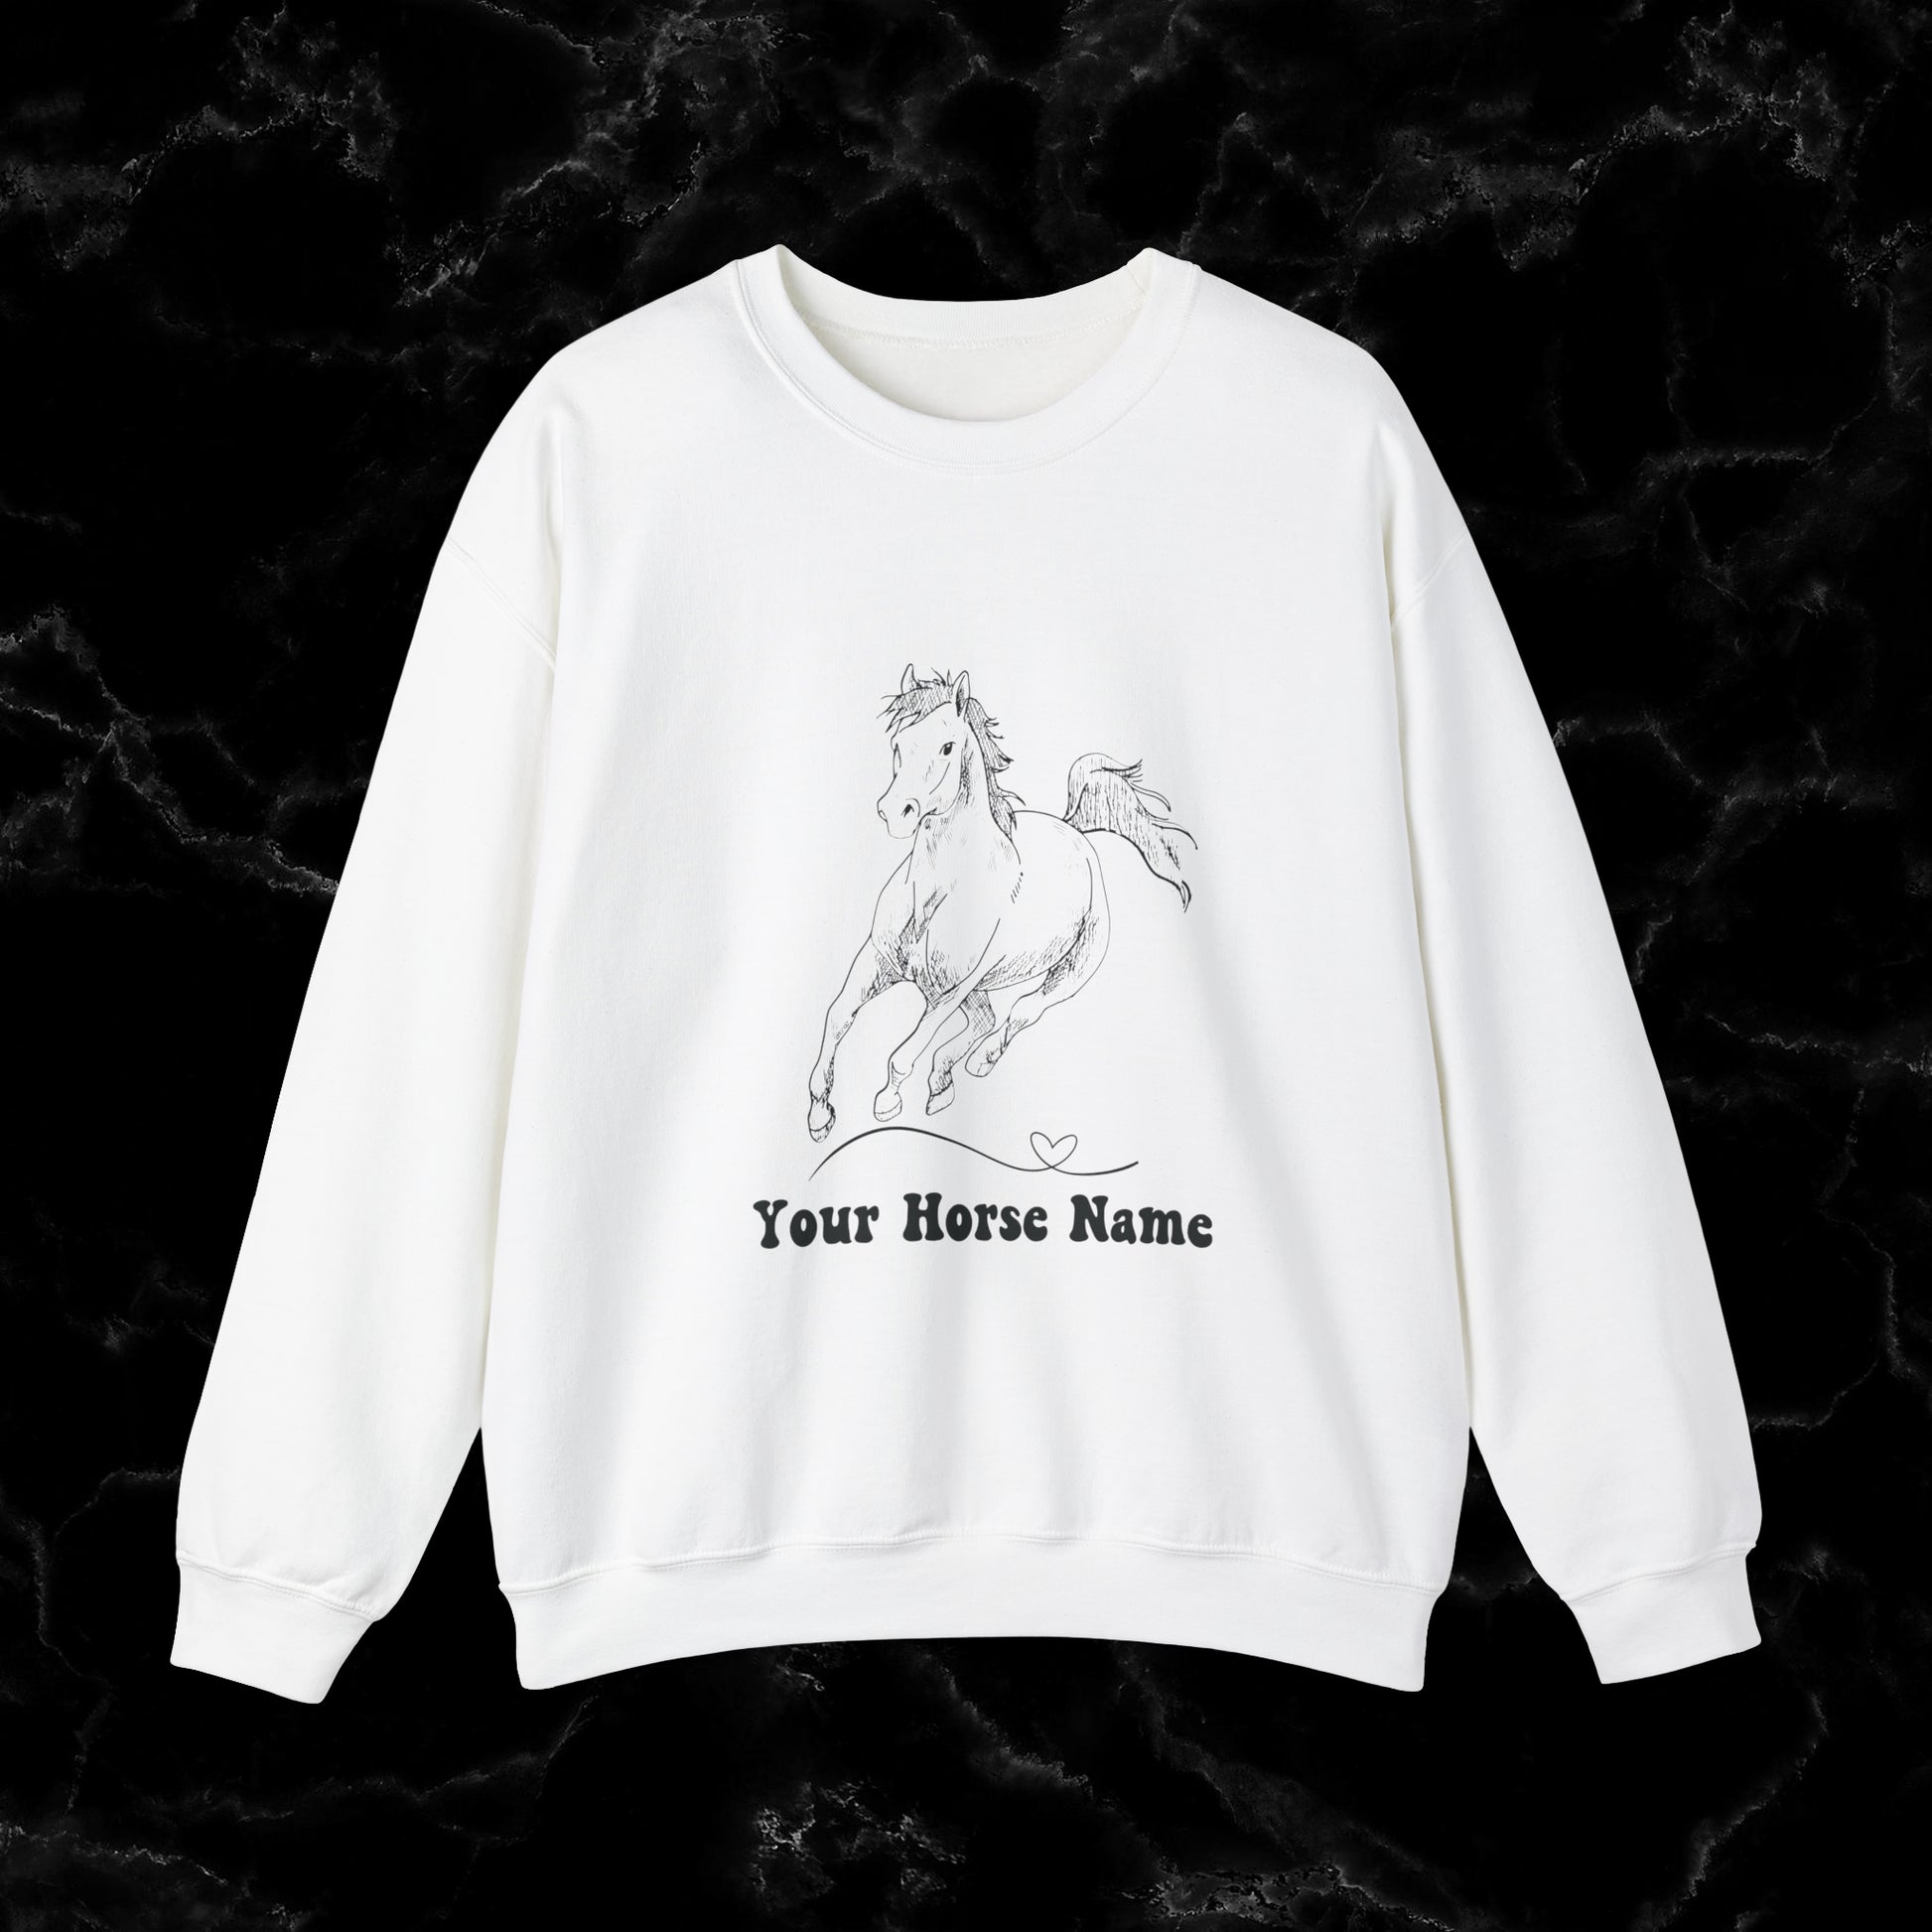 Personalized Horse Sweatshirt - Gift for Horse Owner, Perfect for Christmas, Birthdays, and Equestrian Enthusiasts - Wrap Up Warmth and Personal Connection with this Thoughtful Horse Lover's Gift Sweatshirt S White 